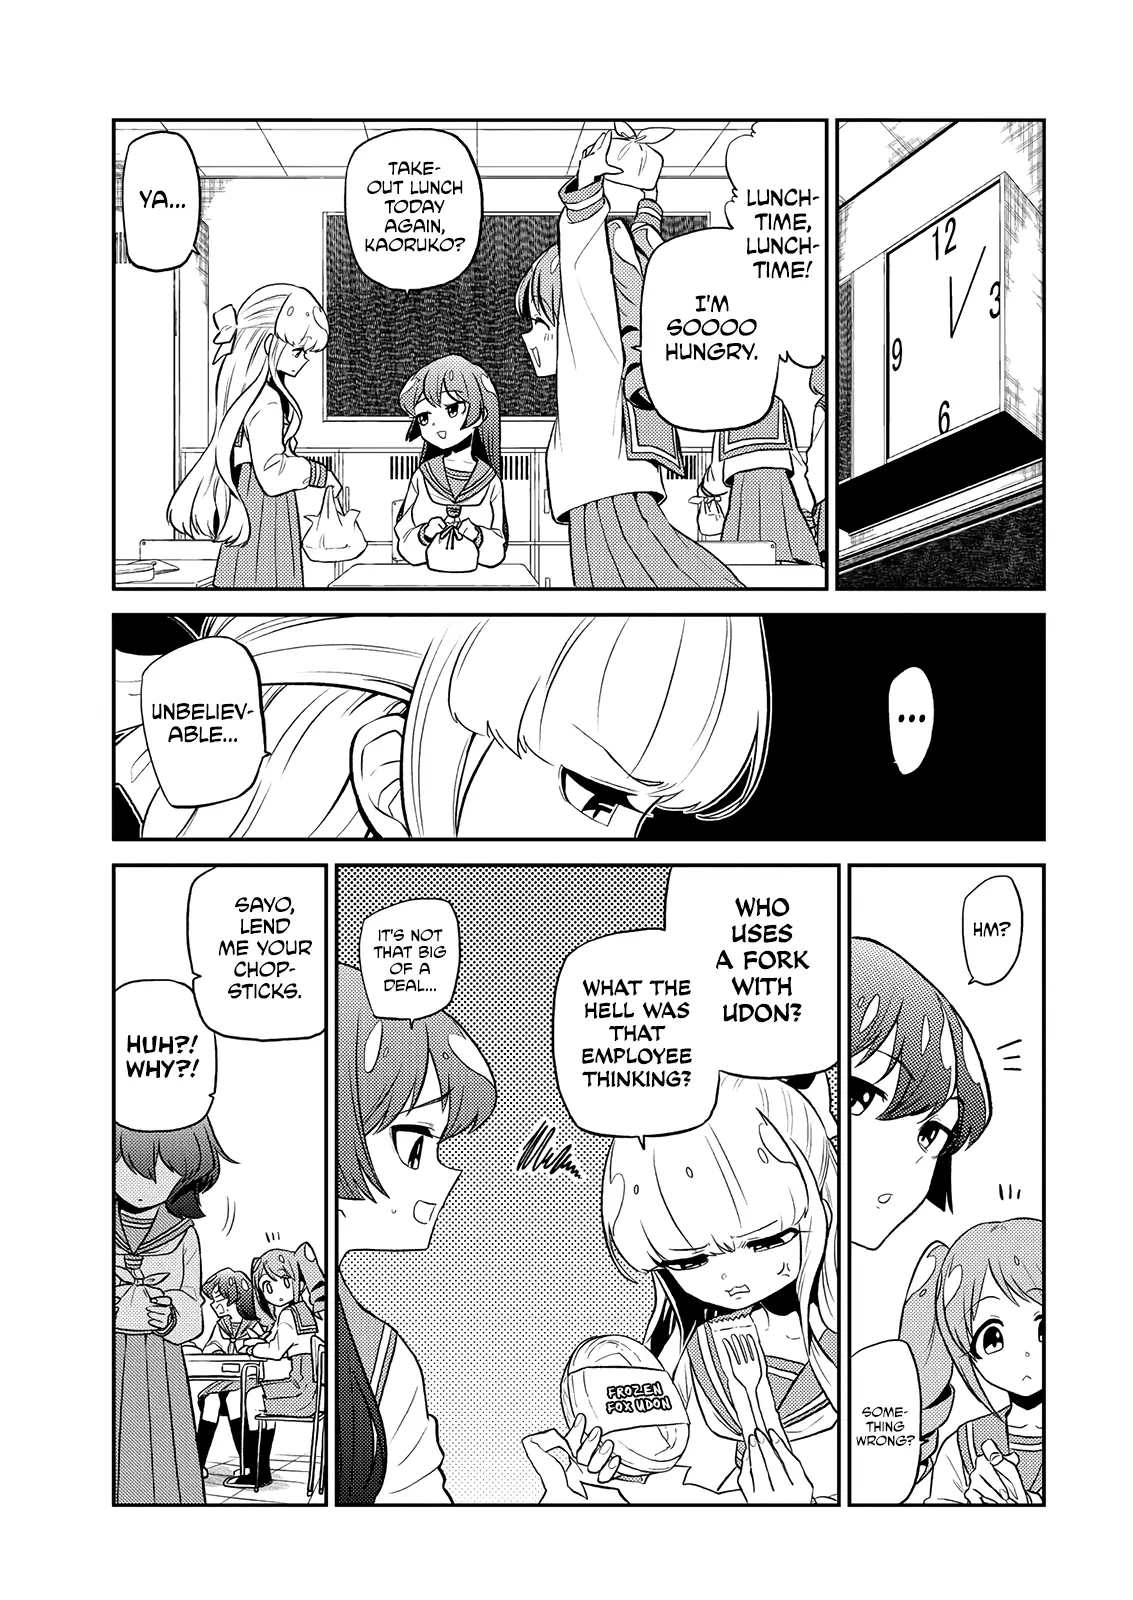 Looking Up To Magical Girls - 8 page 4